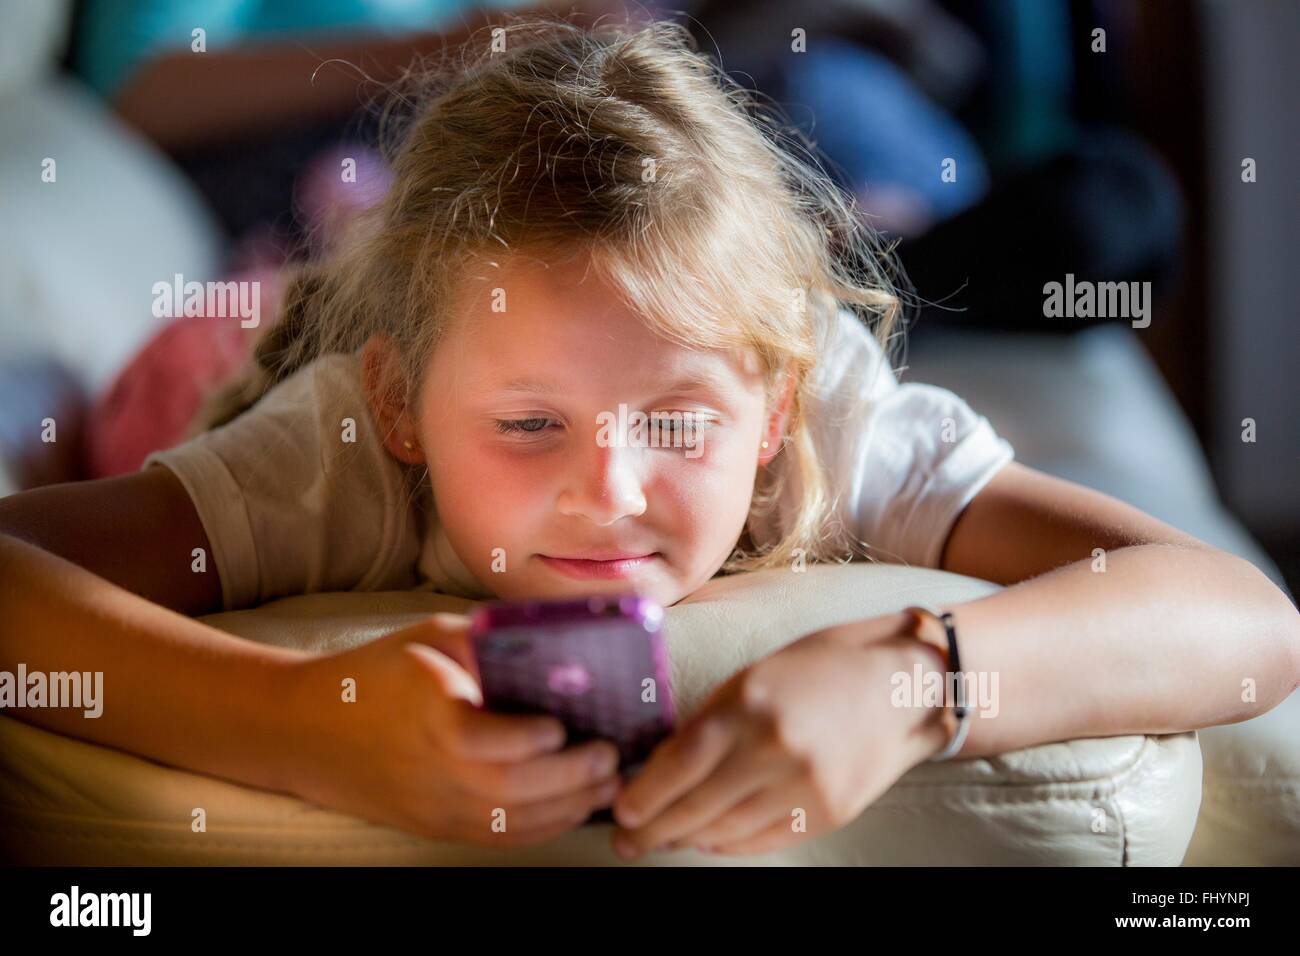 MODEL RELEASED. Girl lying on her front using a smartphone. Stock Photo